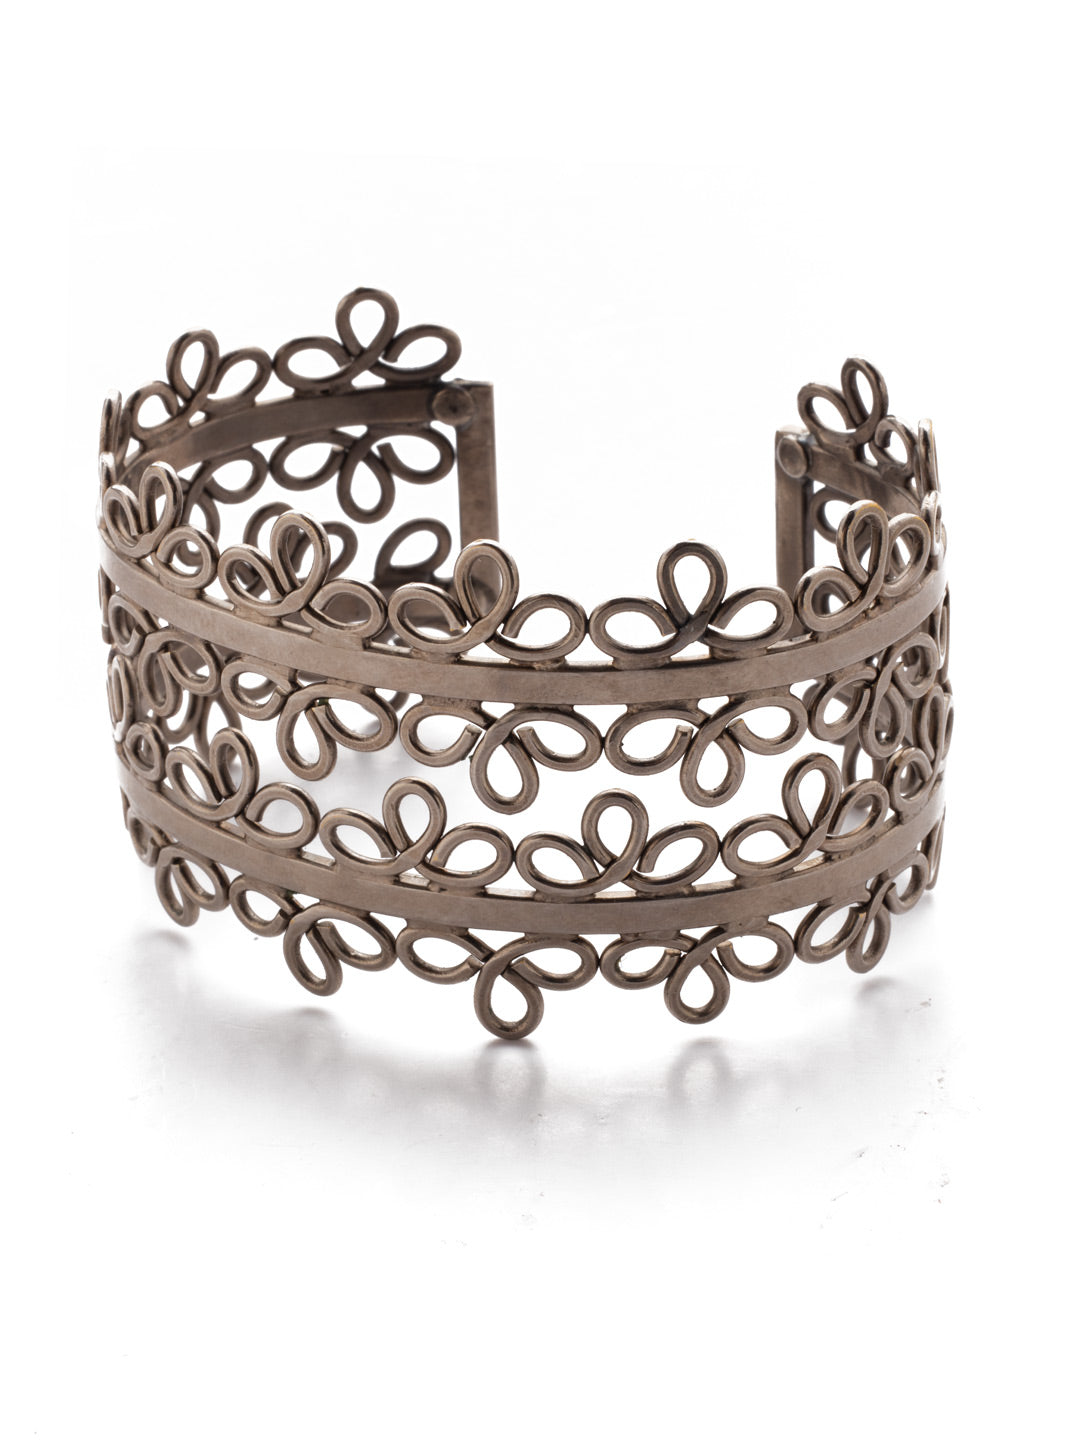 Leilani Cuff Bracelet - 4BES9ASCRY - <p>Go big on metallic fun with our Leilani Cuff Bracelet. A double band of stunning, hand-soldered metalwork makes it a showstopping piece. From Sorrelli's Crystal collection in our Antique Silver-tone finish.</p>